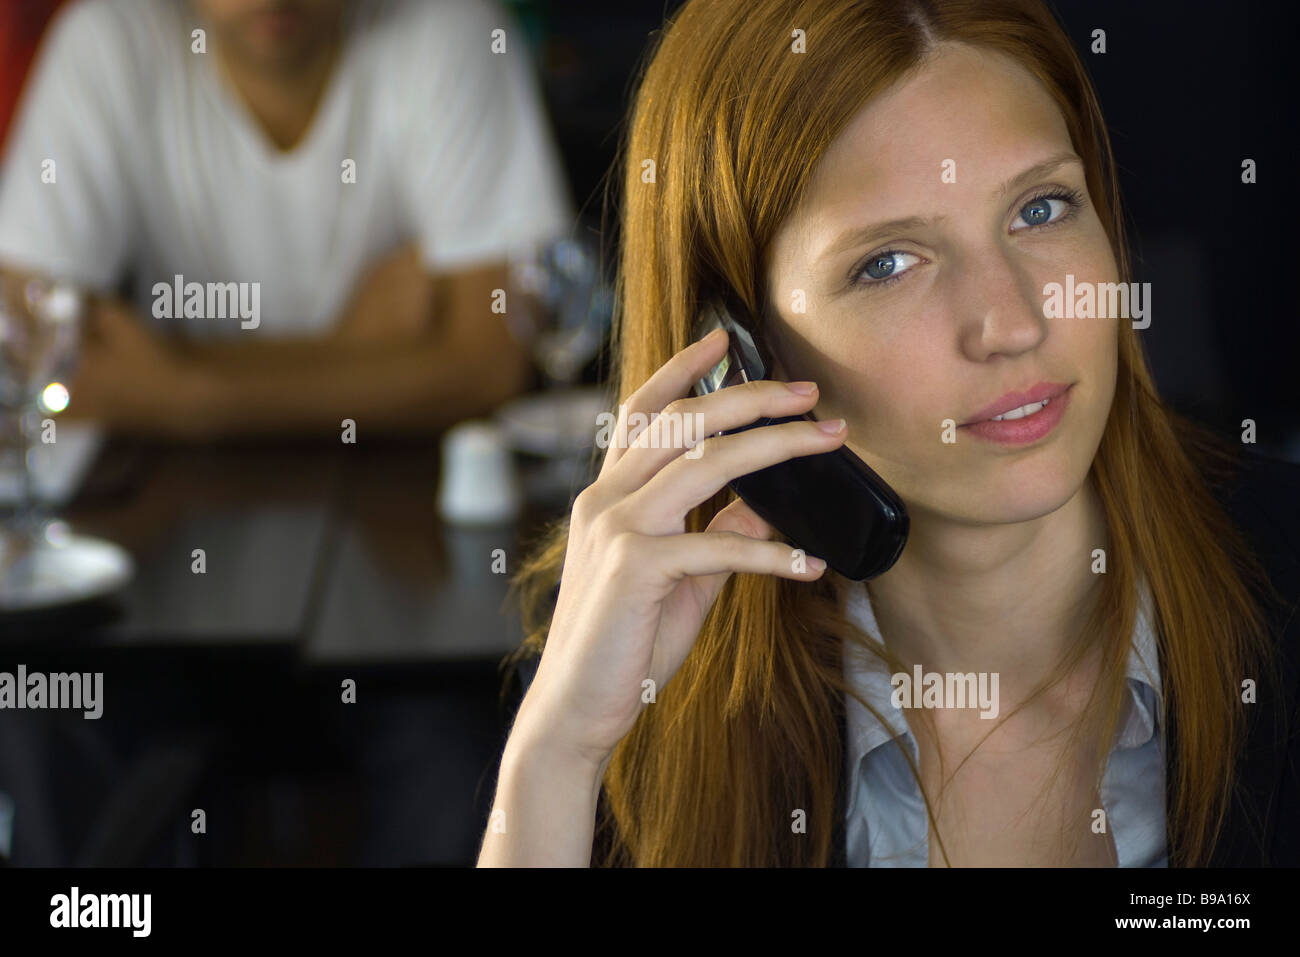 Woman holding cell phone to ear, smiling at camera Stock Photo